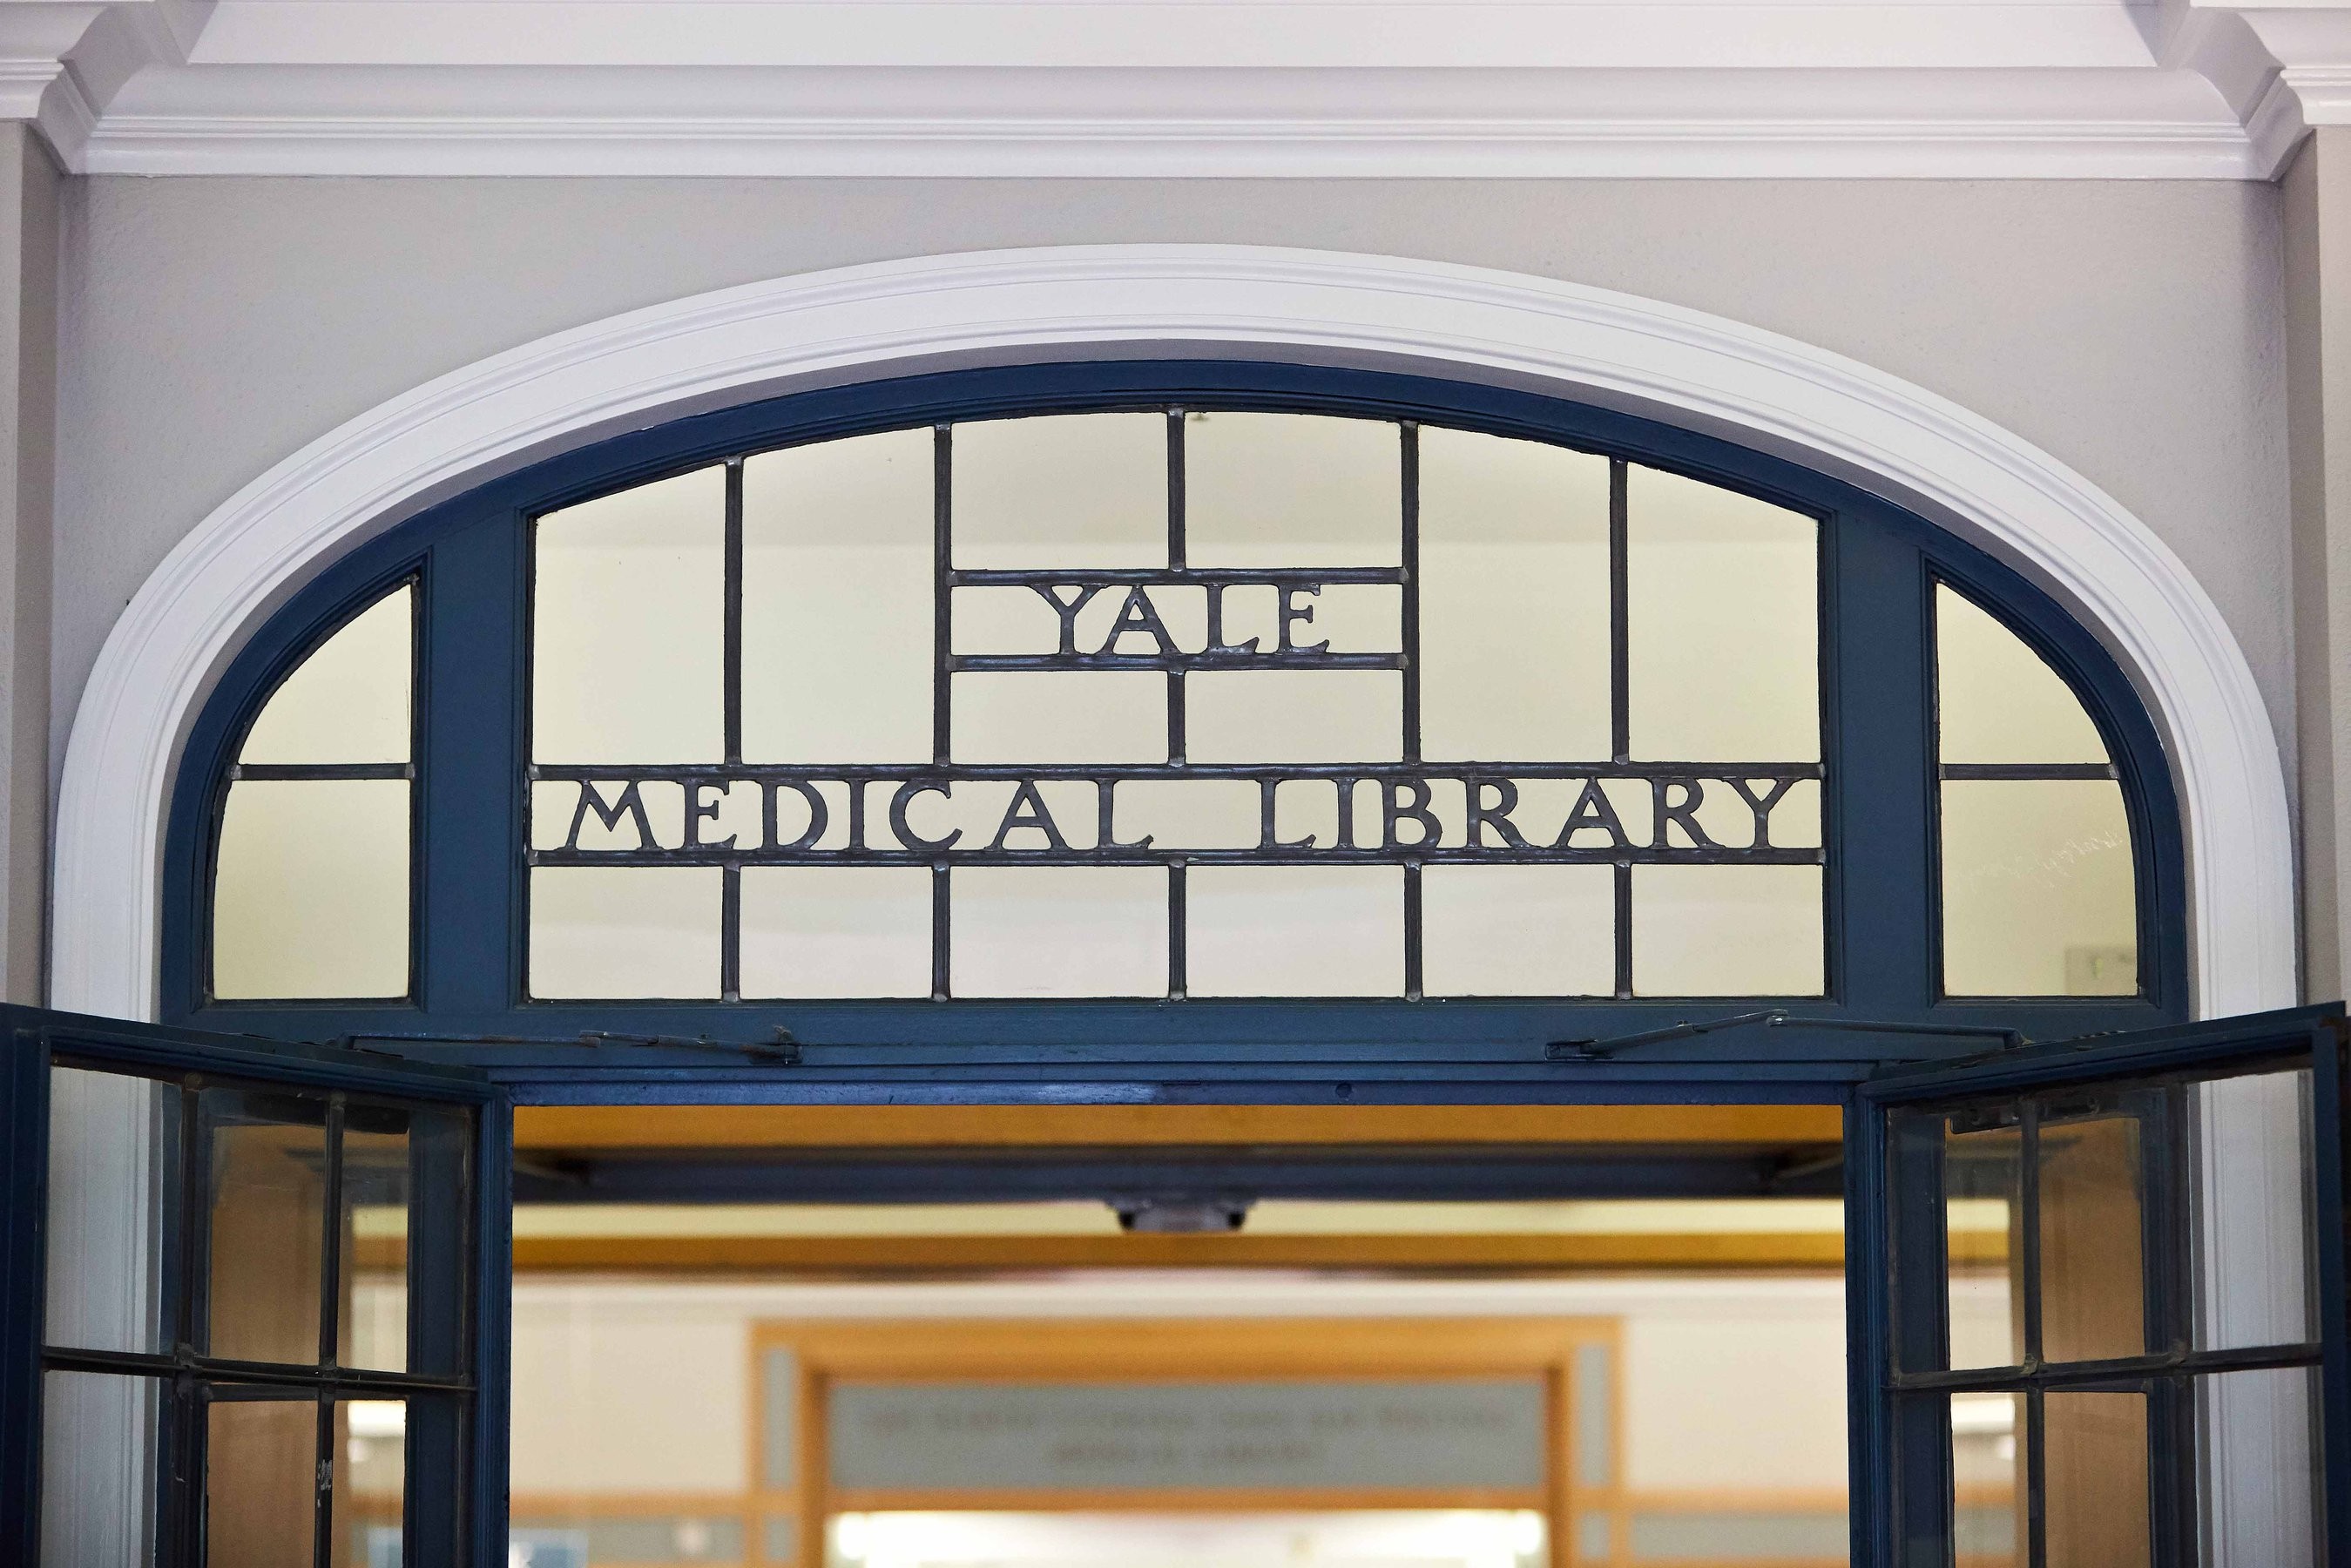 Sign entering the Yale Medical Library